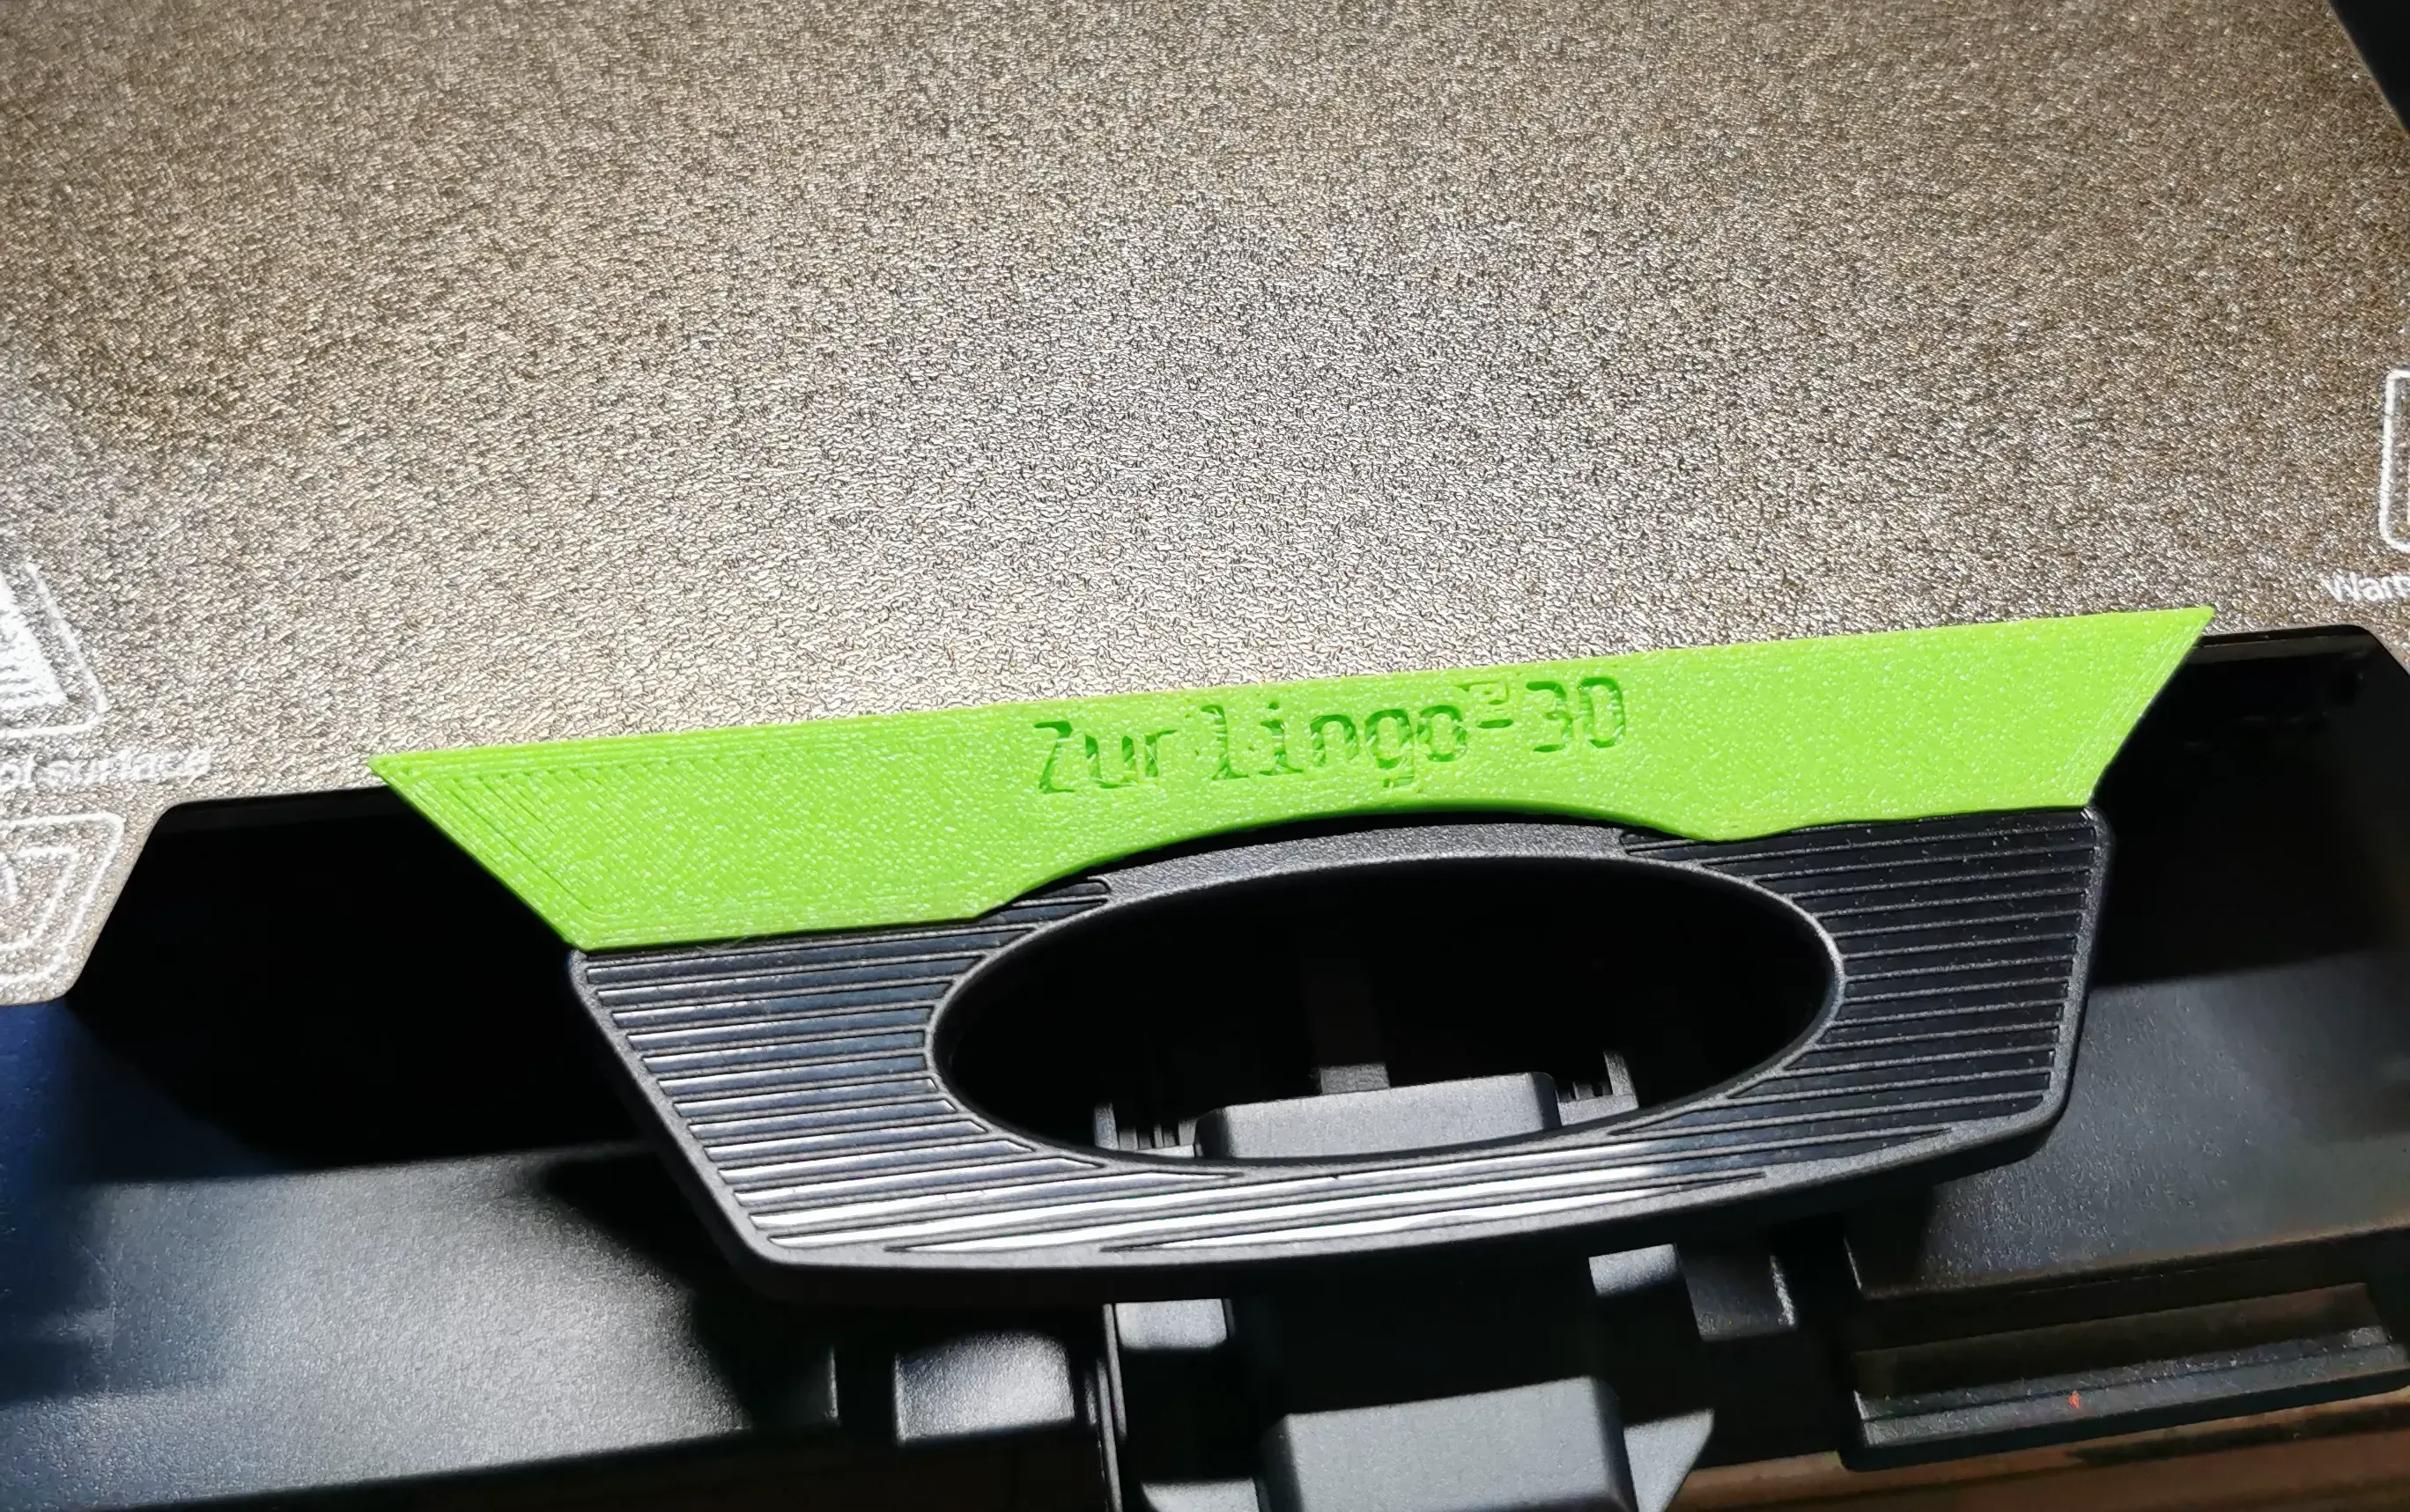 Ender 3 S1 Pro - Bed Alignment Stop